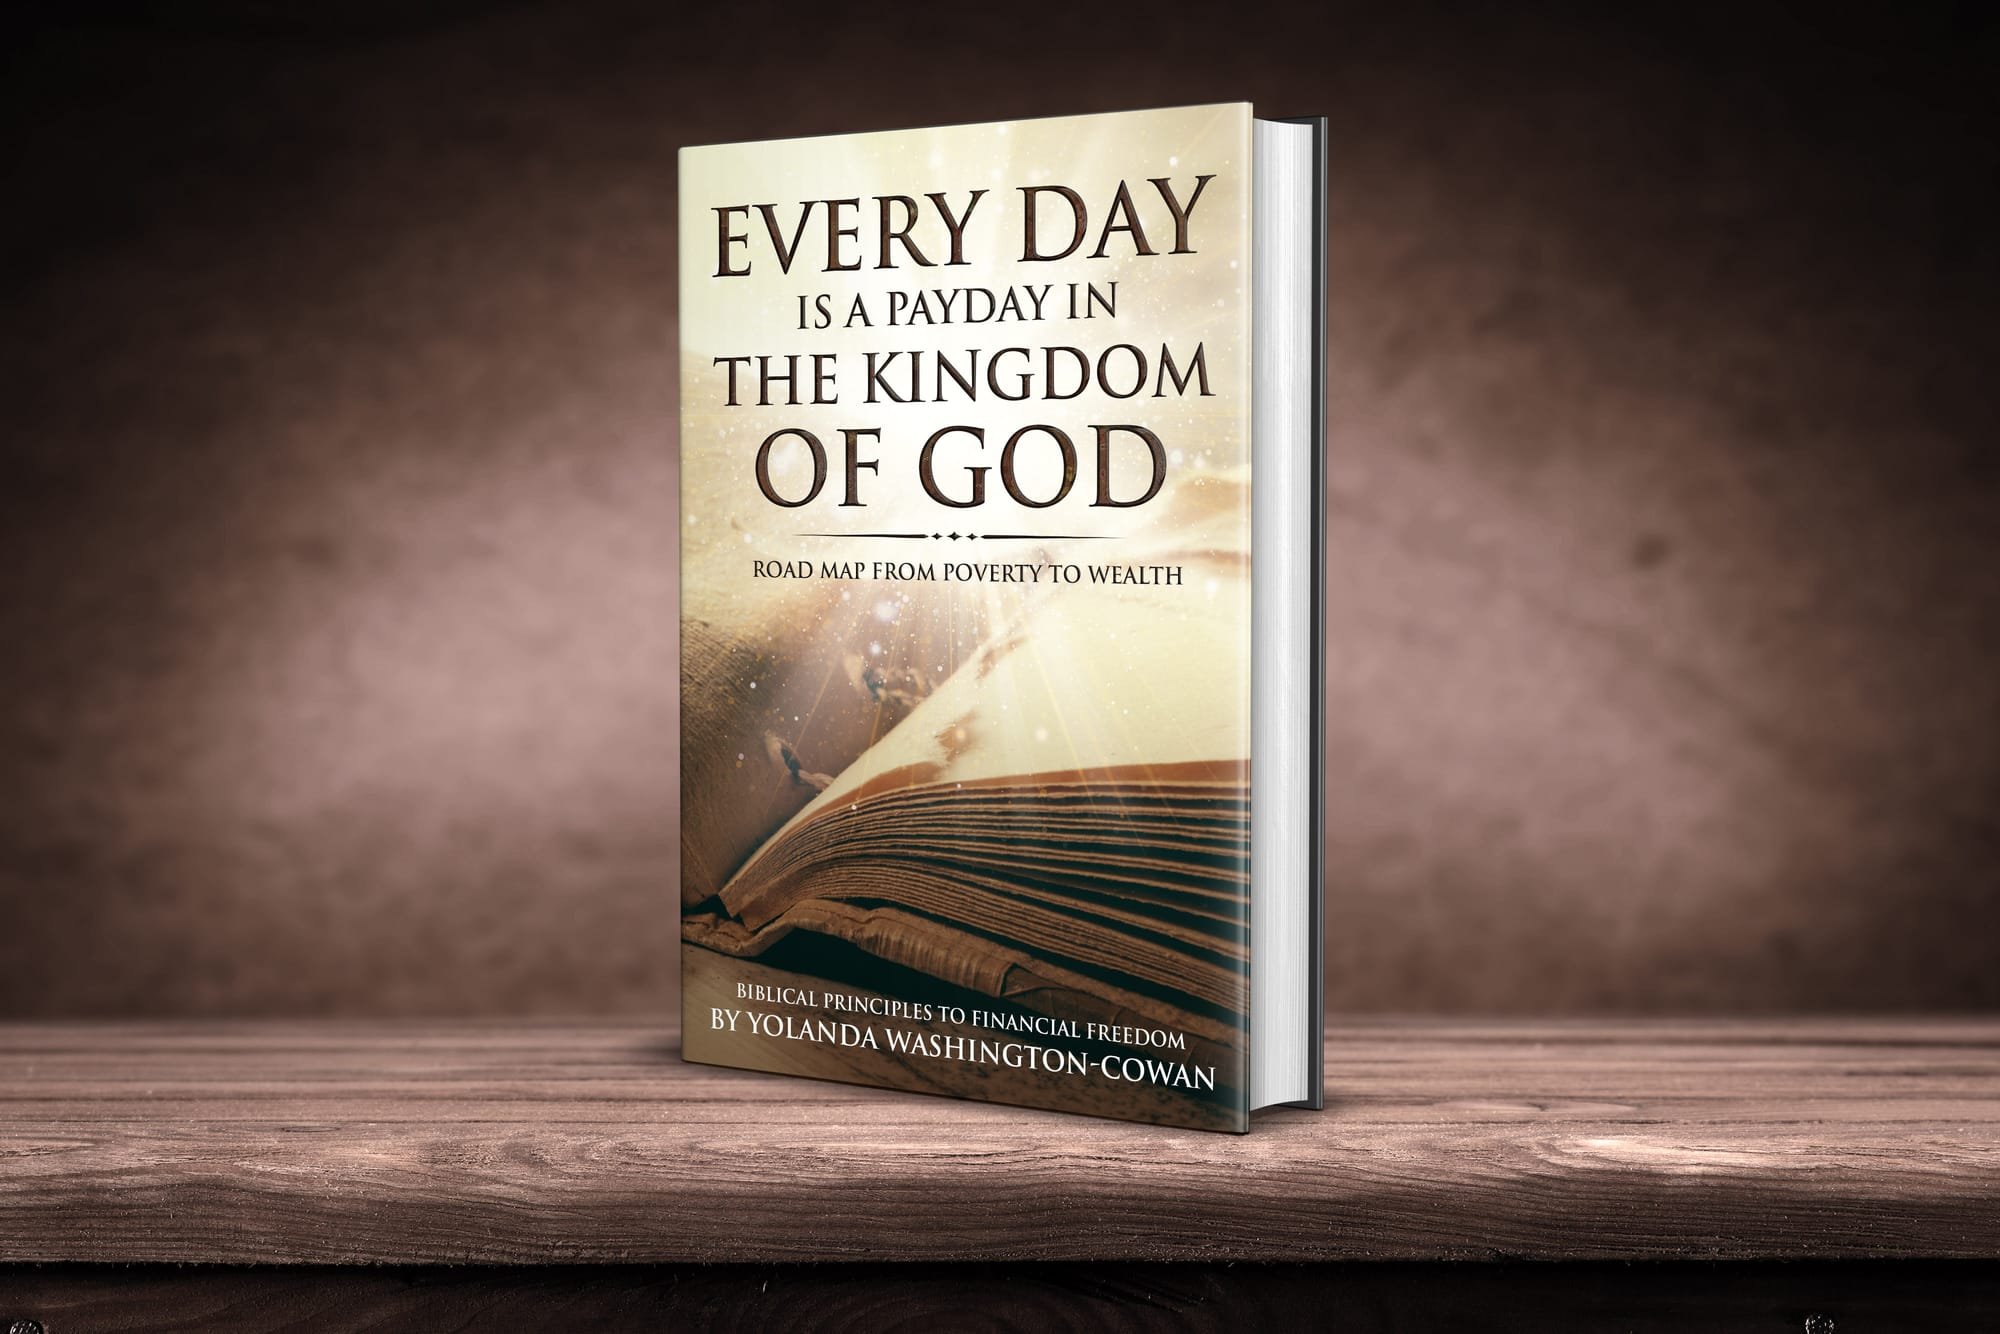 Every Day is a Payday in the Kingdom of God  Available in Ebook, Audible and Hard-copy